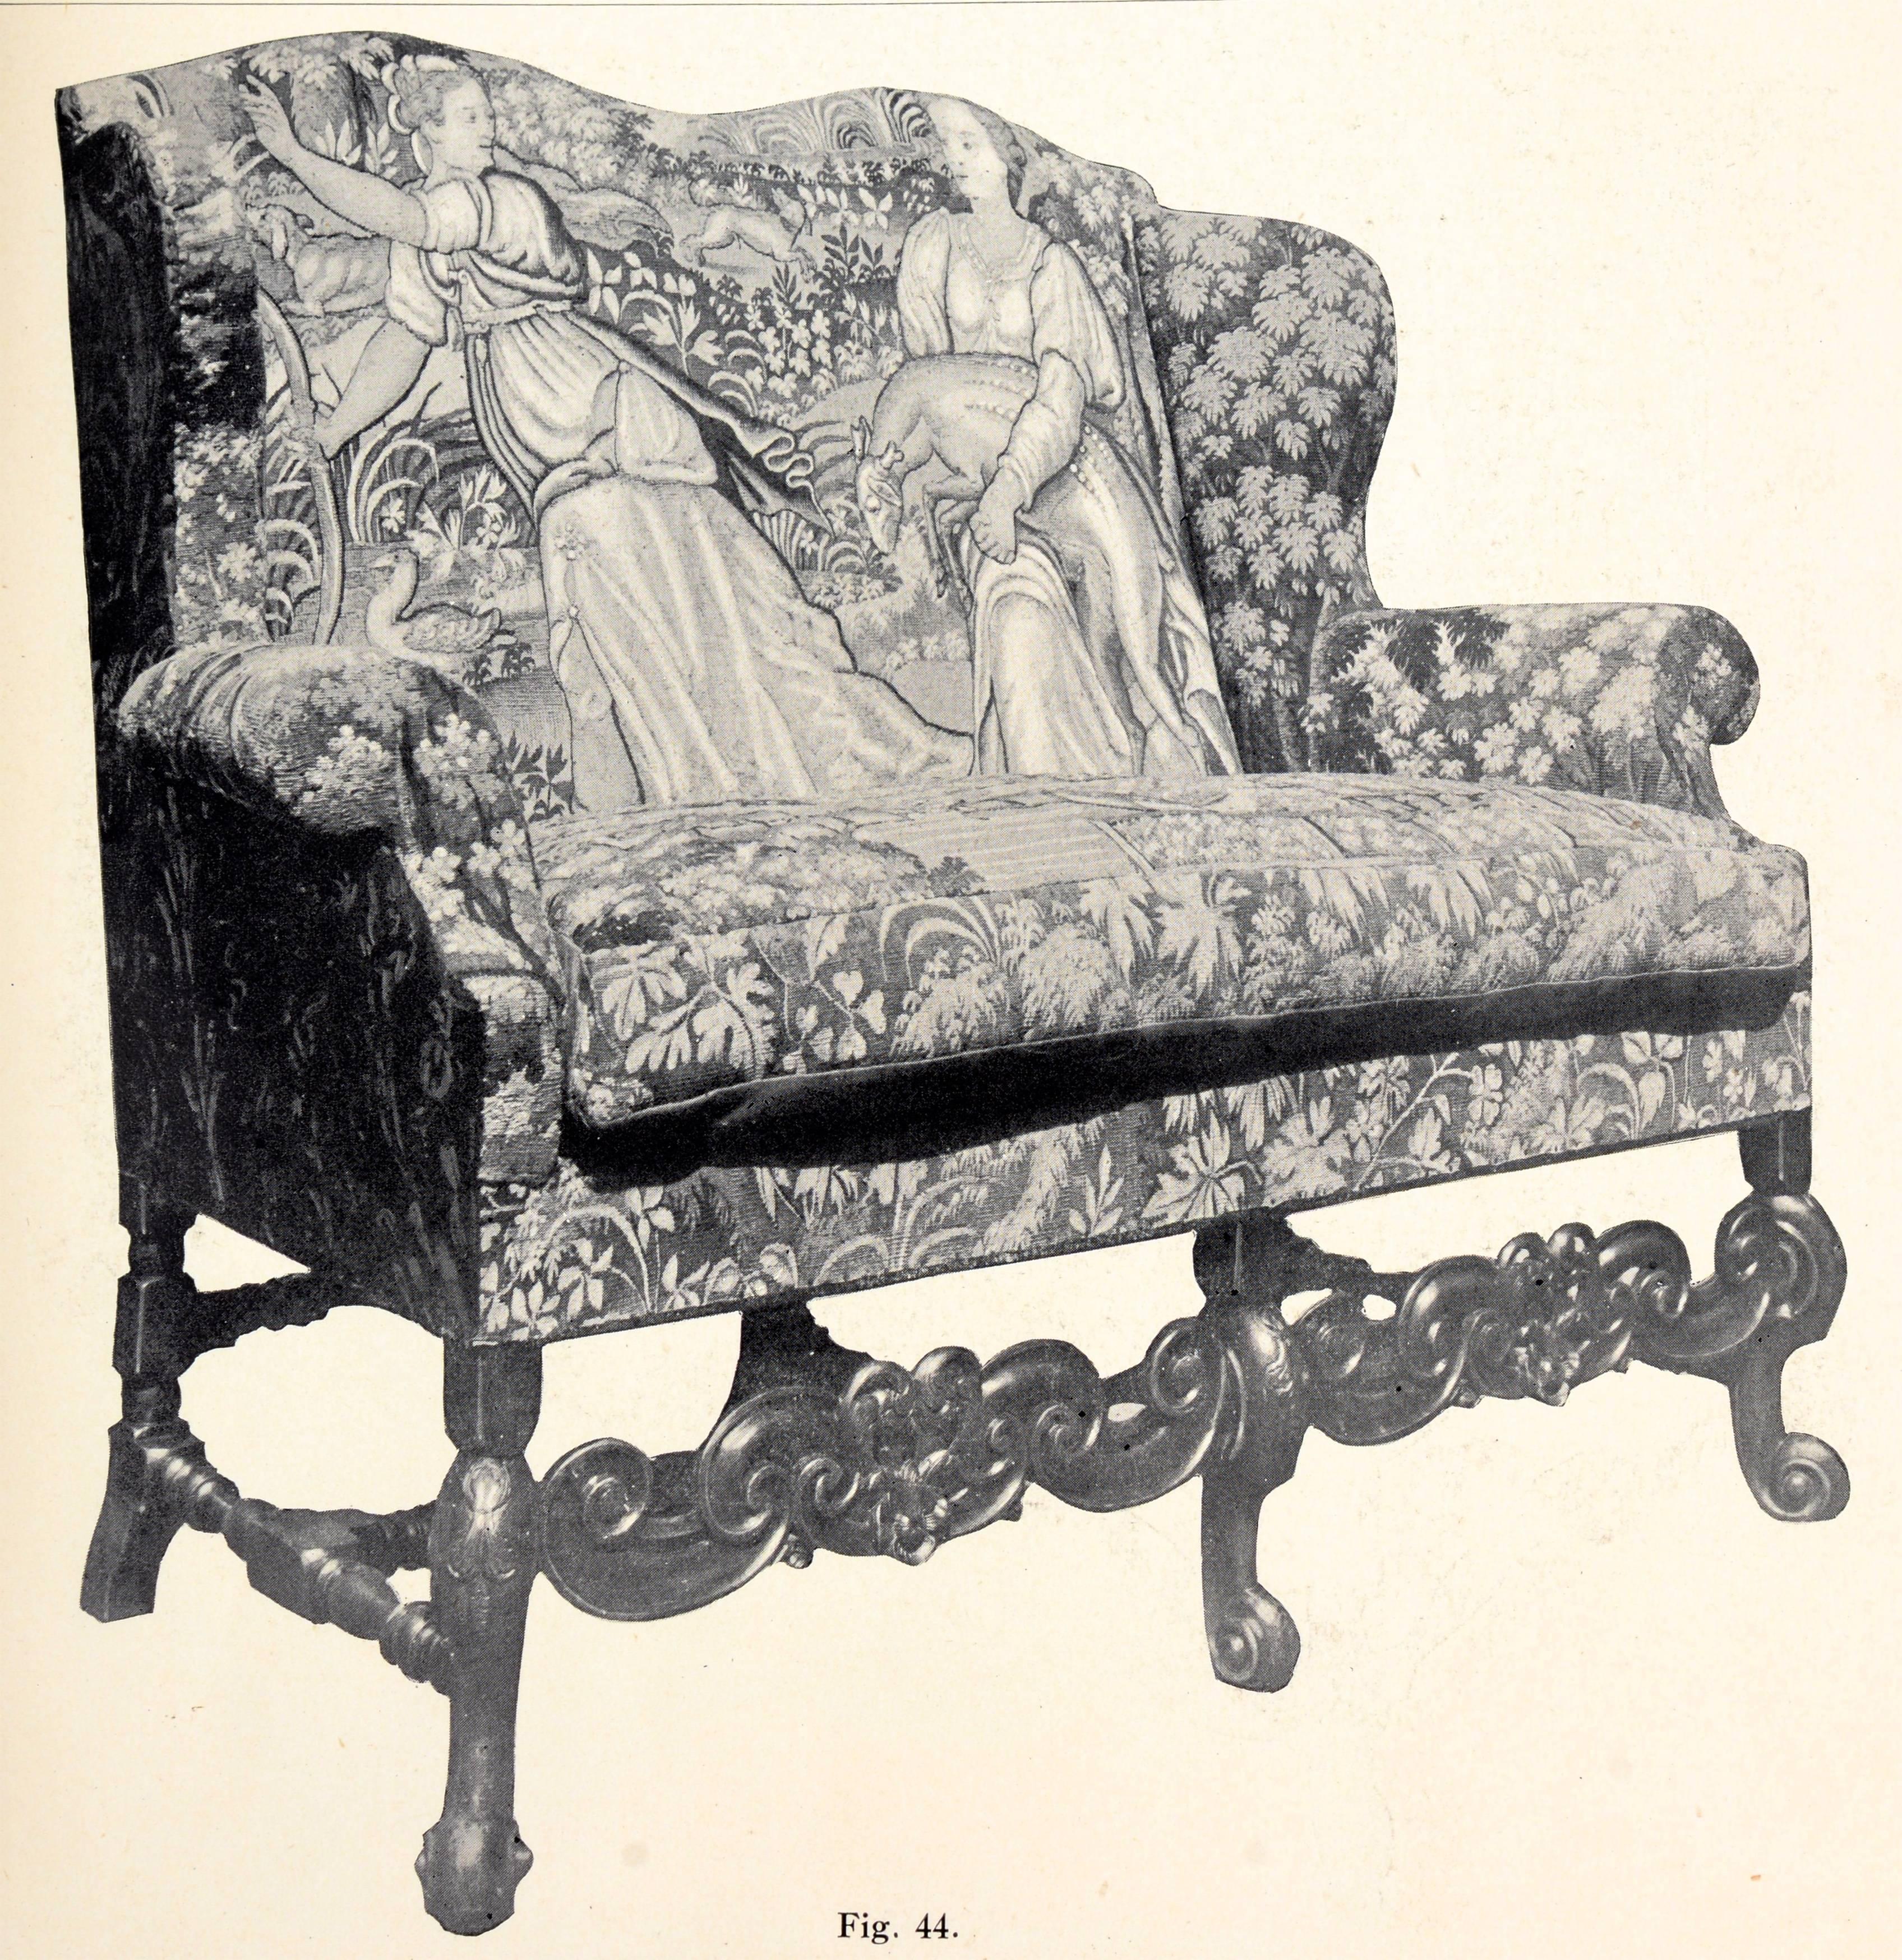 English furniture of the 18th-century, Vol. I. II. & III. by Herbert Cescinsky. London: Geo Sadler & Co., 1909. First edition hardcovers, no dust jackets. Addresses every detail of the furniture in the period, as well as in-depth histories